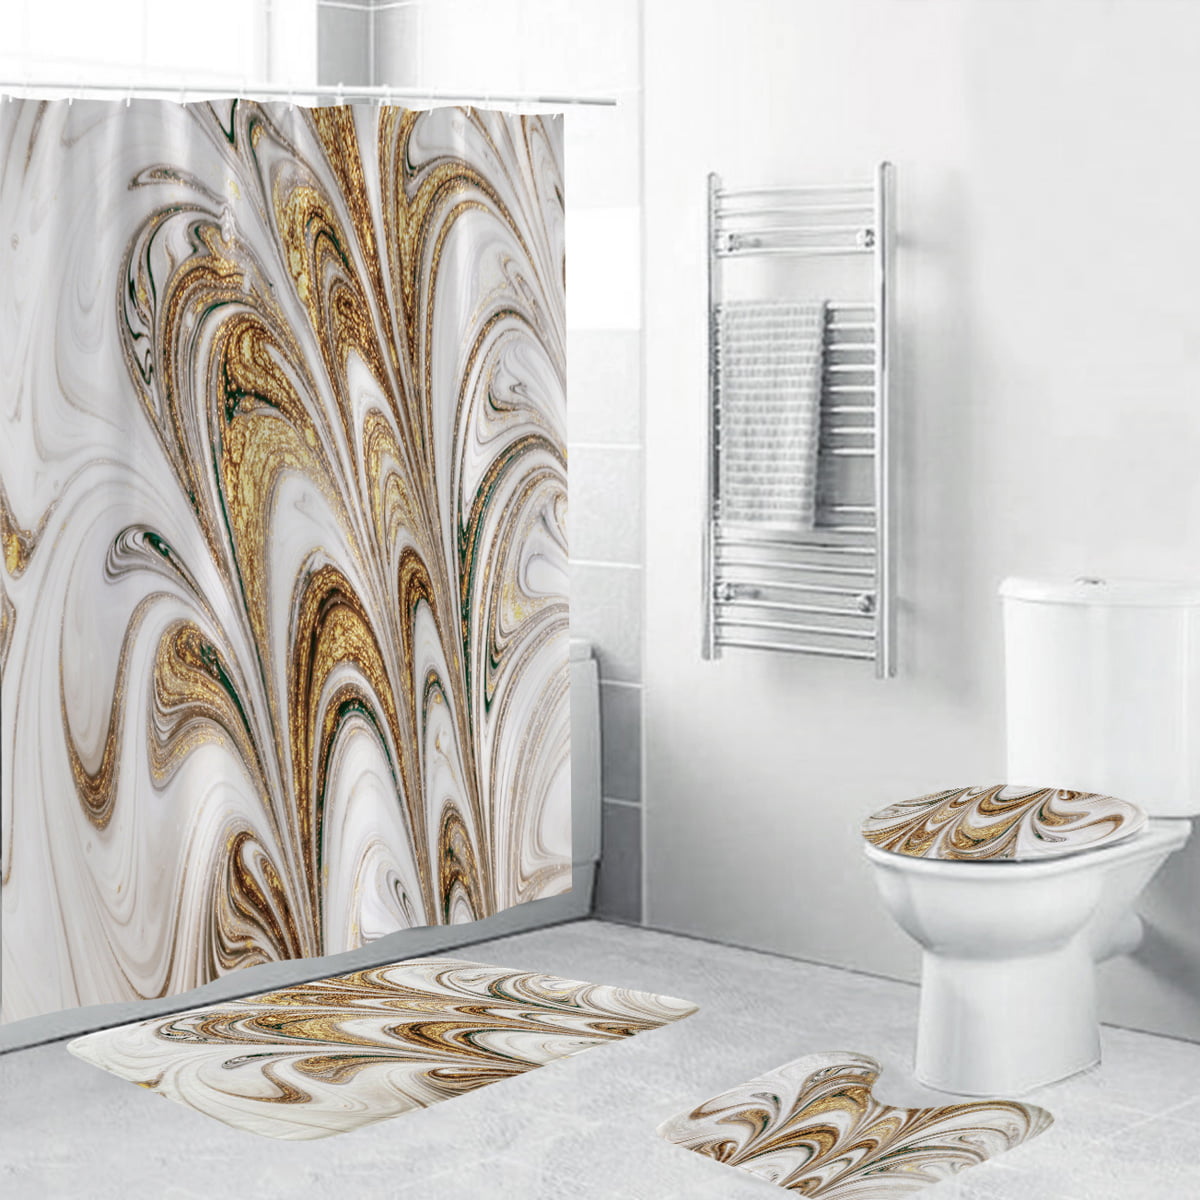 Details about   Tropical Fabric Leaves Butterflies Shower Curtain Toilet Cover Rug Contour Rug 